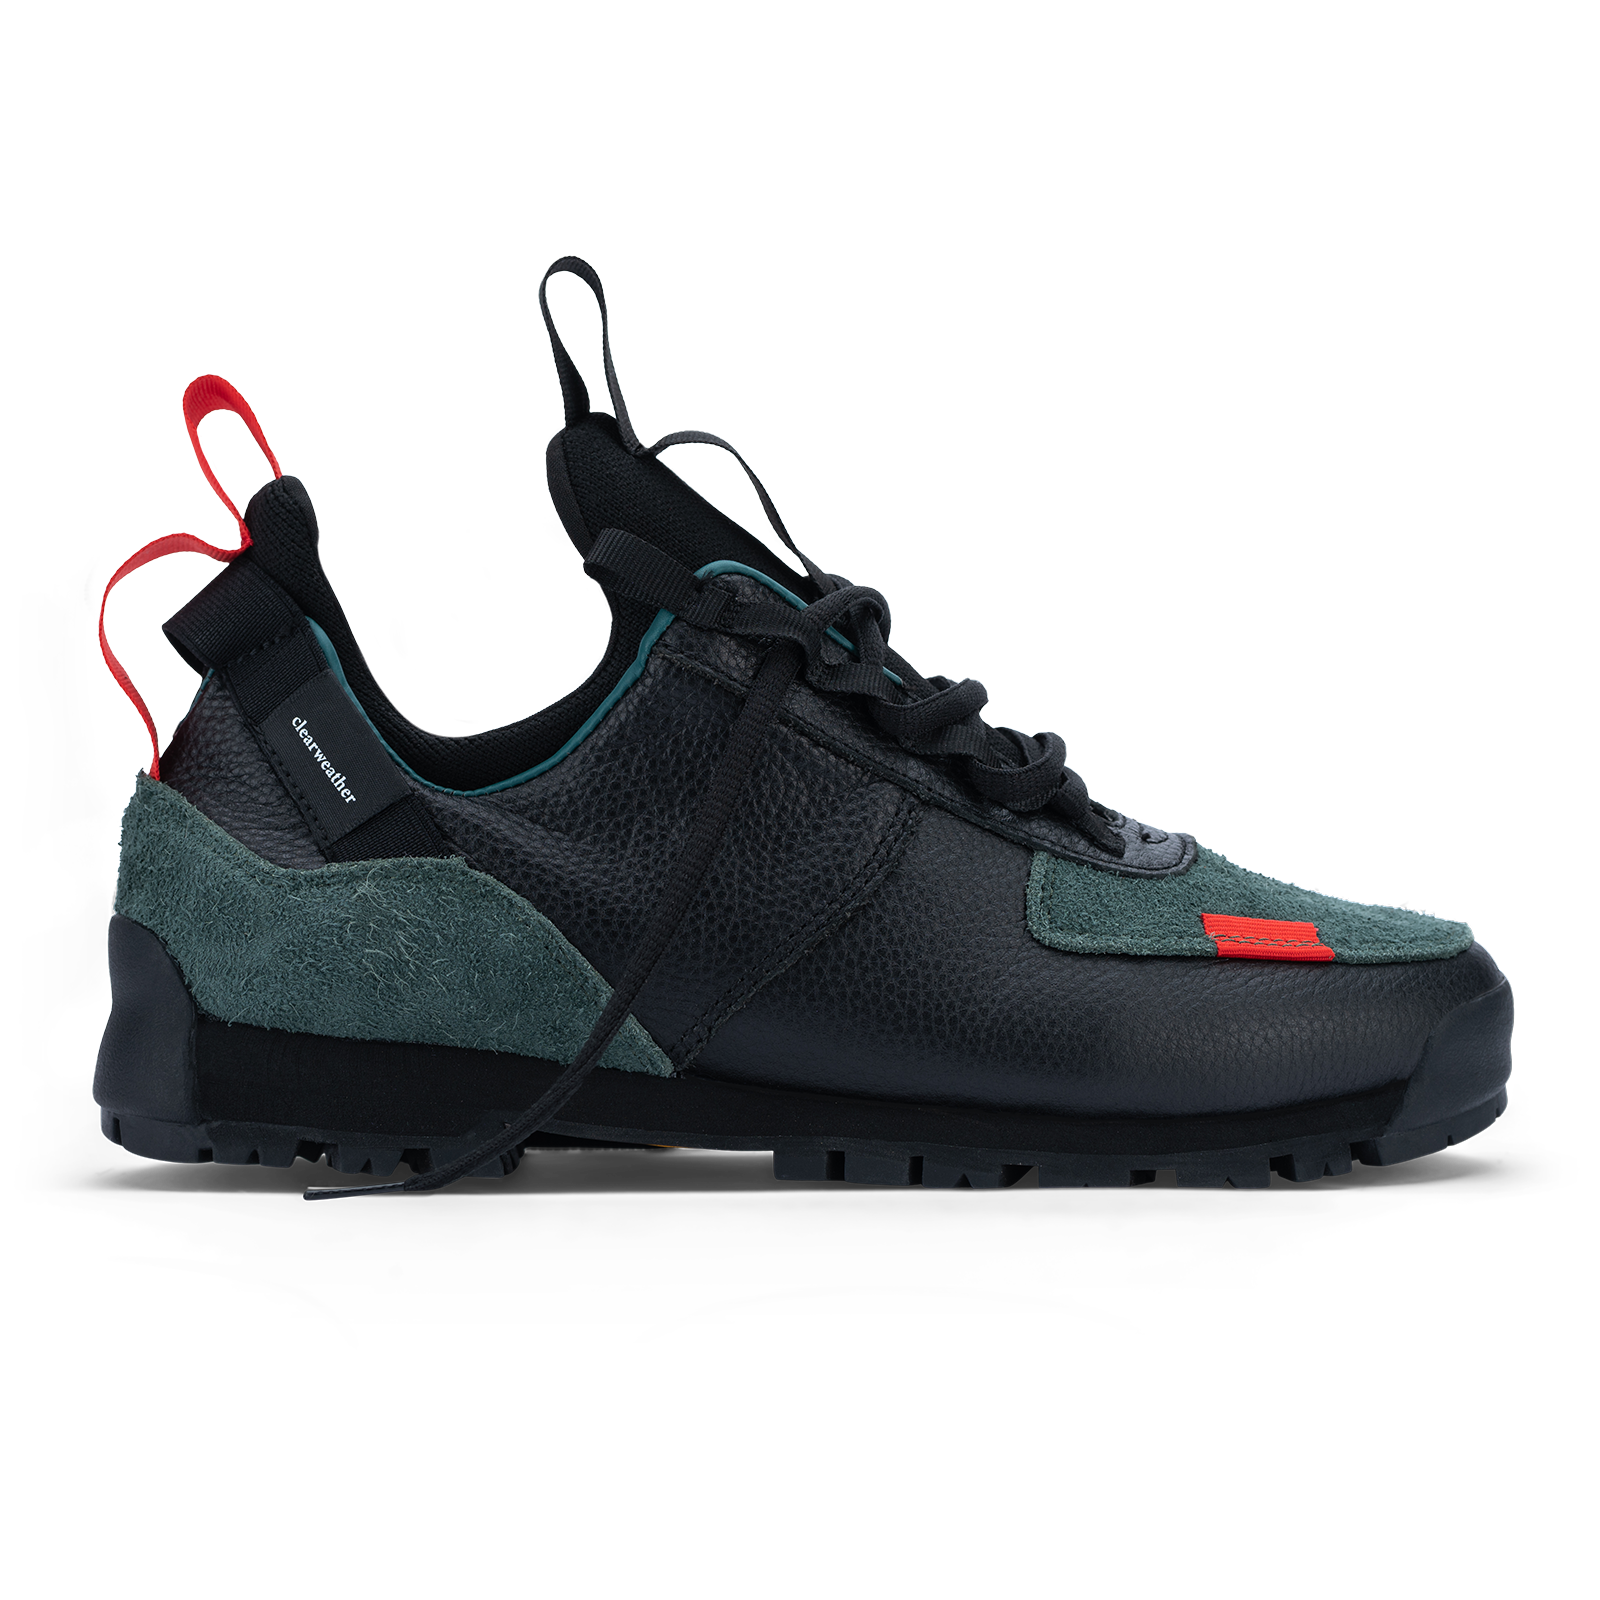 profile shot  / Approach / Sage color features Black fullgrain leahter and Green hairy suede upper, gross grain webbing for laces. helastic heel detail, stretch mesh internal bootie, vintrage vibram hiking outsole and eva midsole.